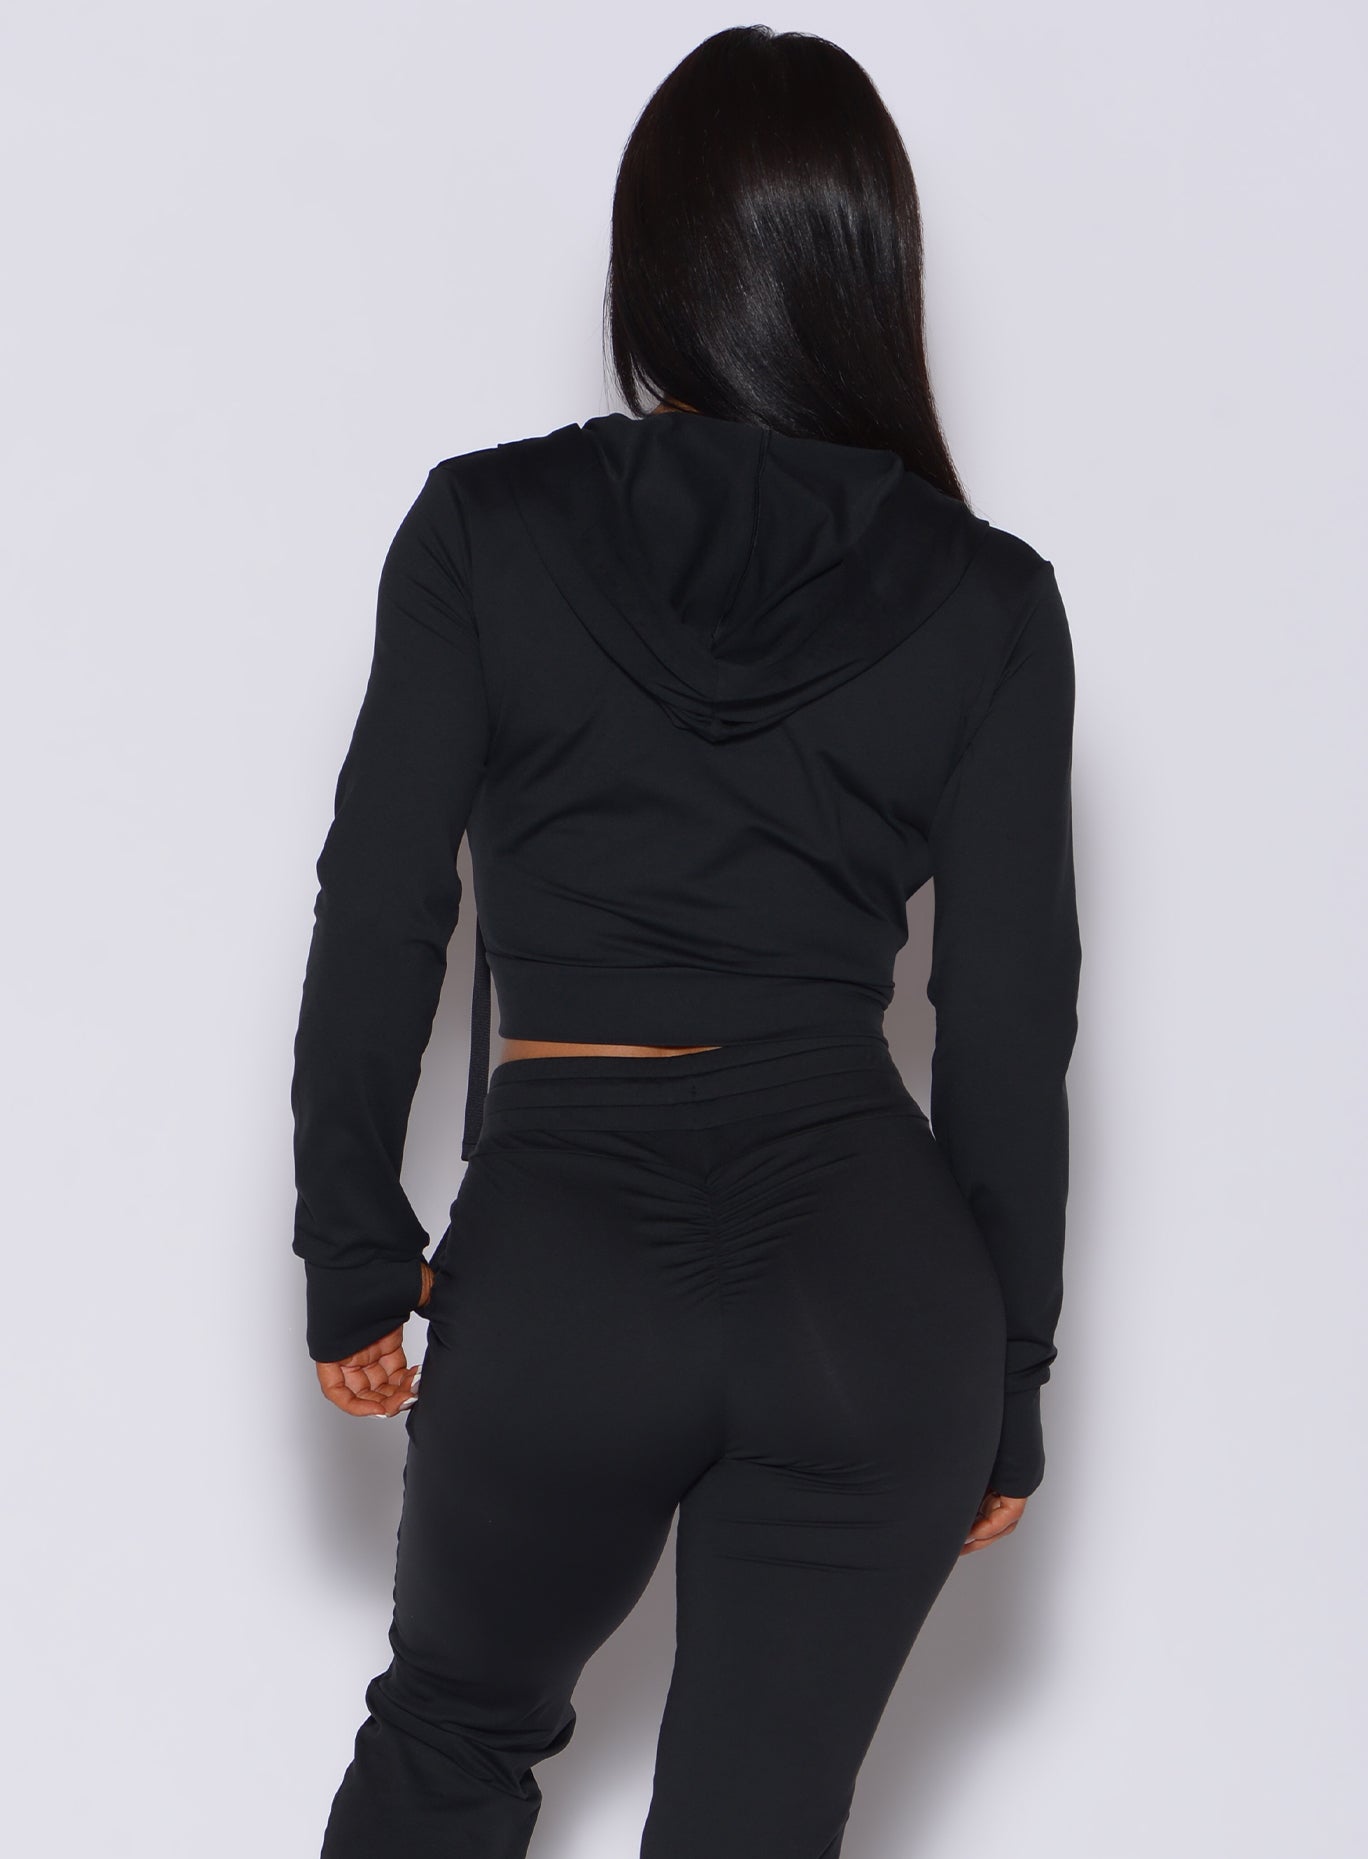 back view of model wearing the signature hoodie jacket in black